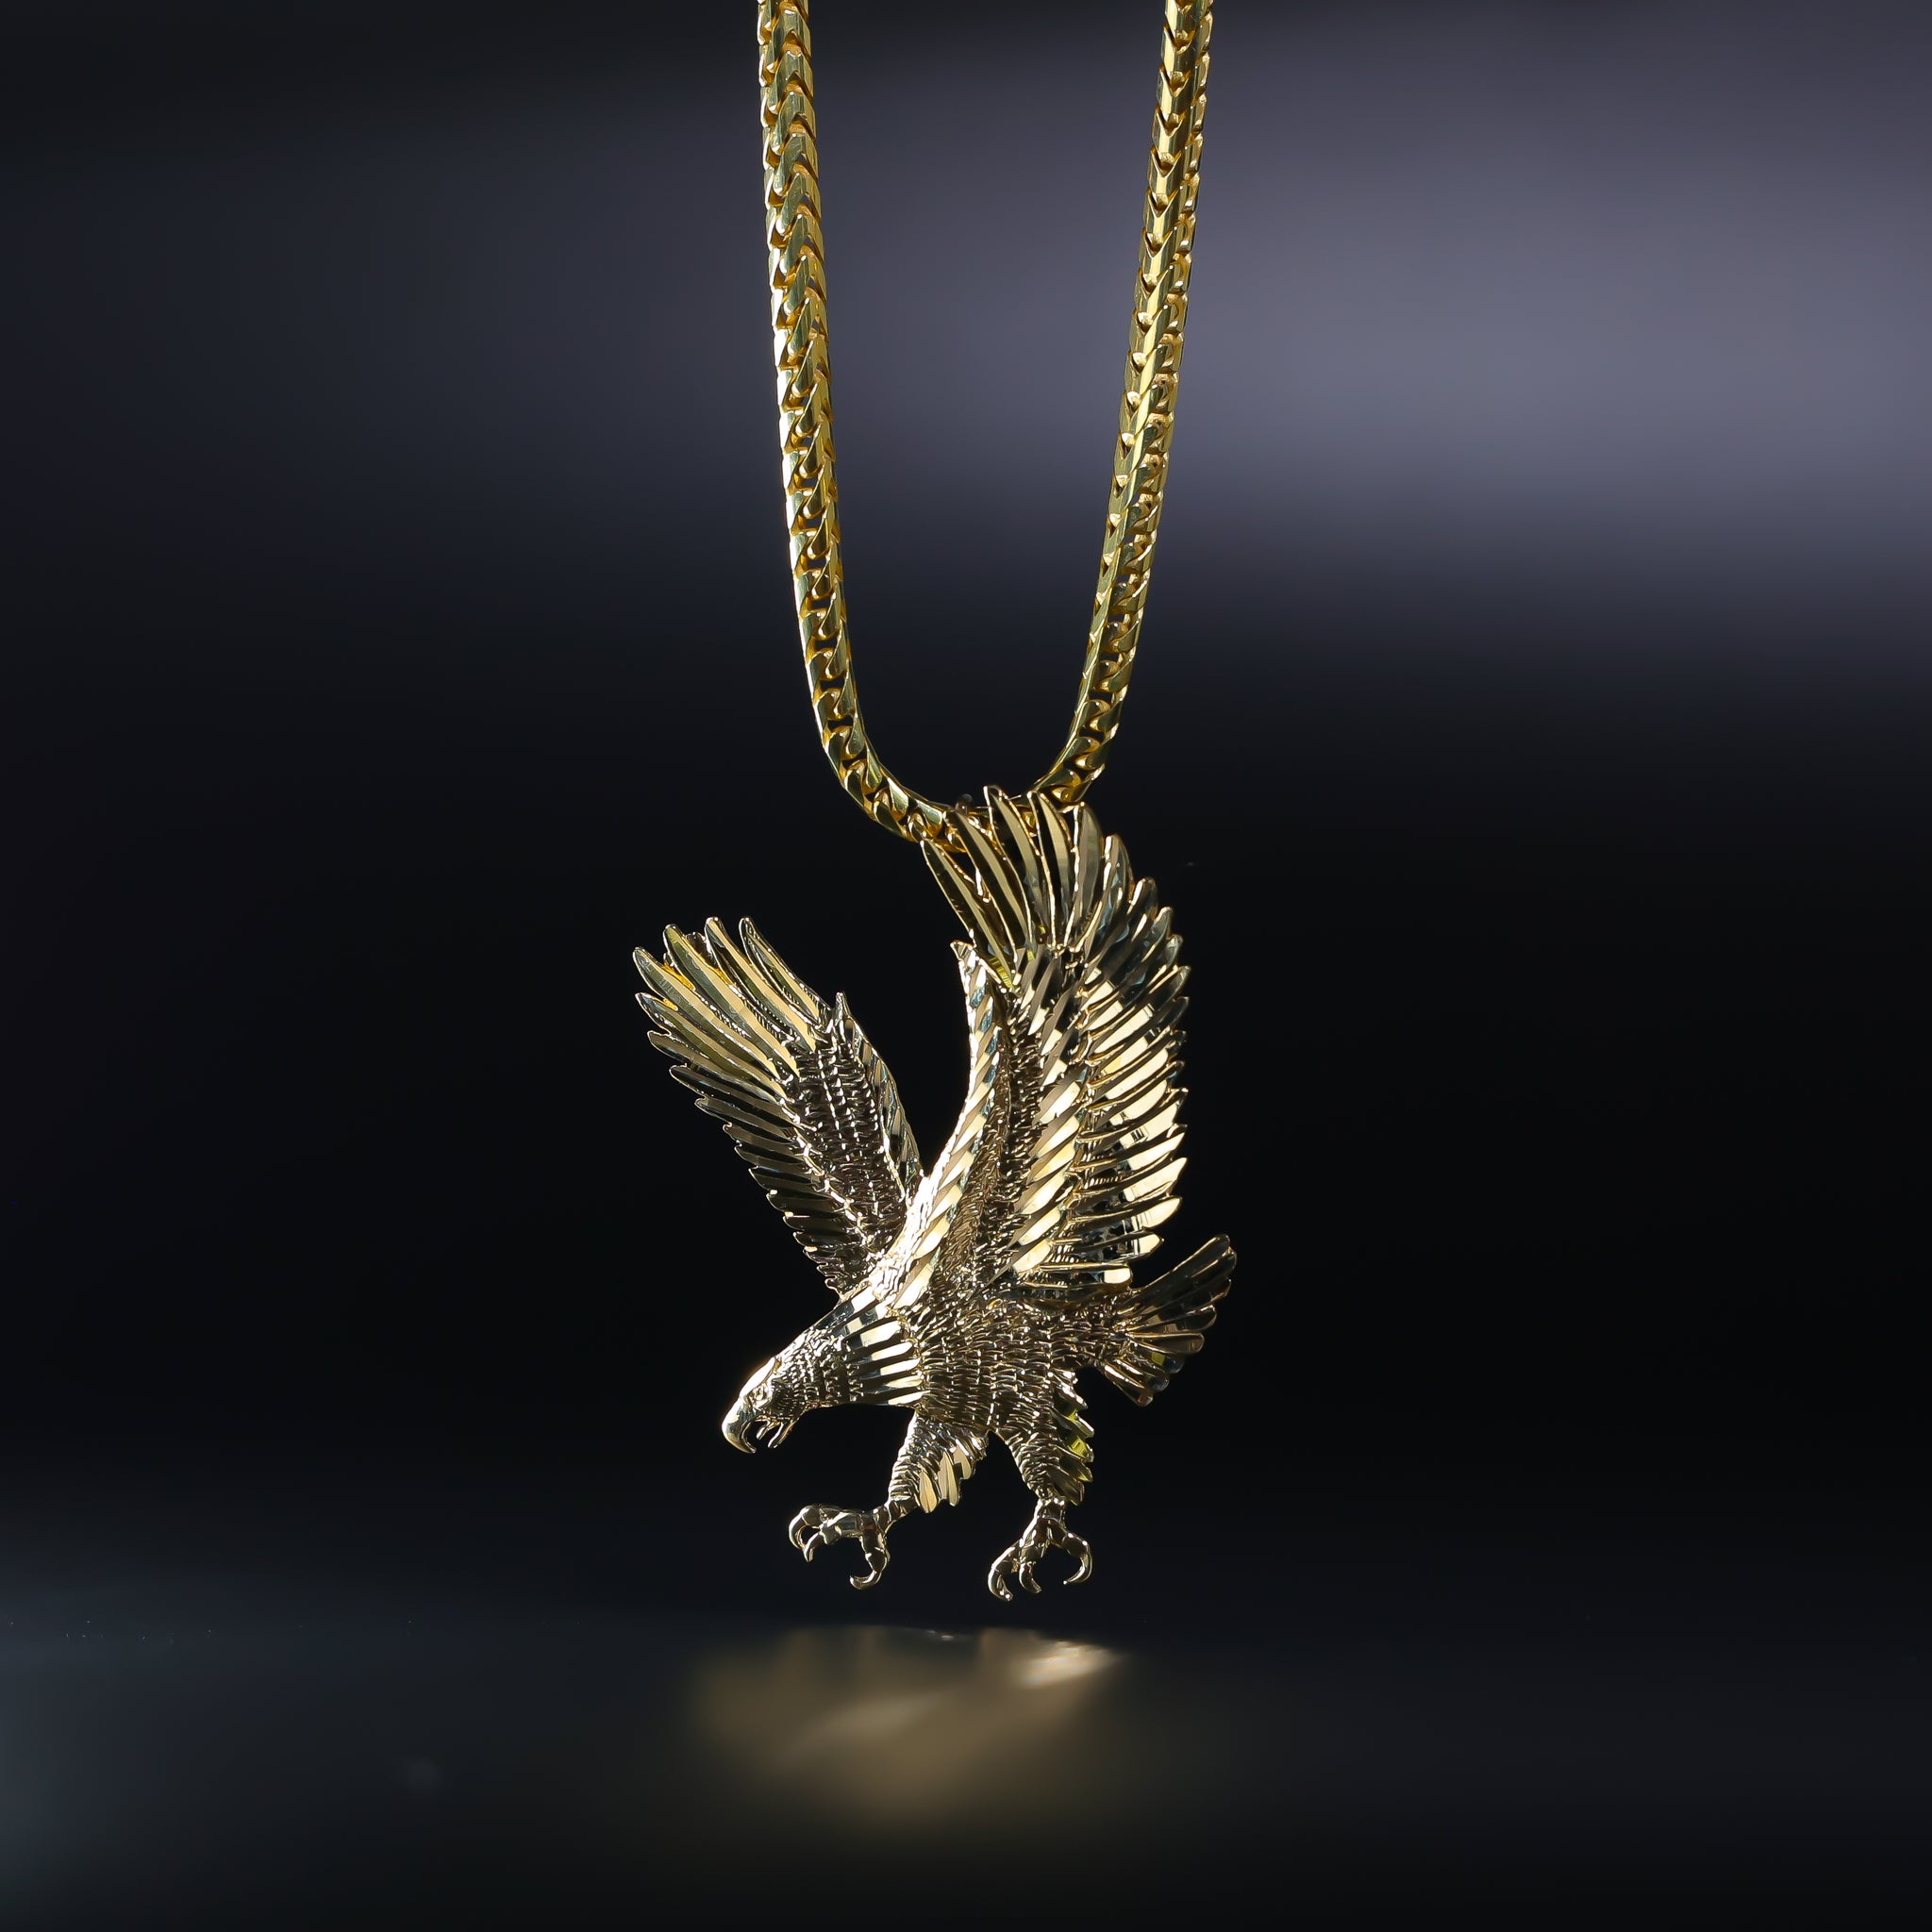 Gold Eagle Pendant Model-1591 - Charlie & Co. Jewelry